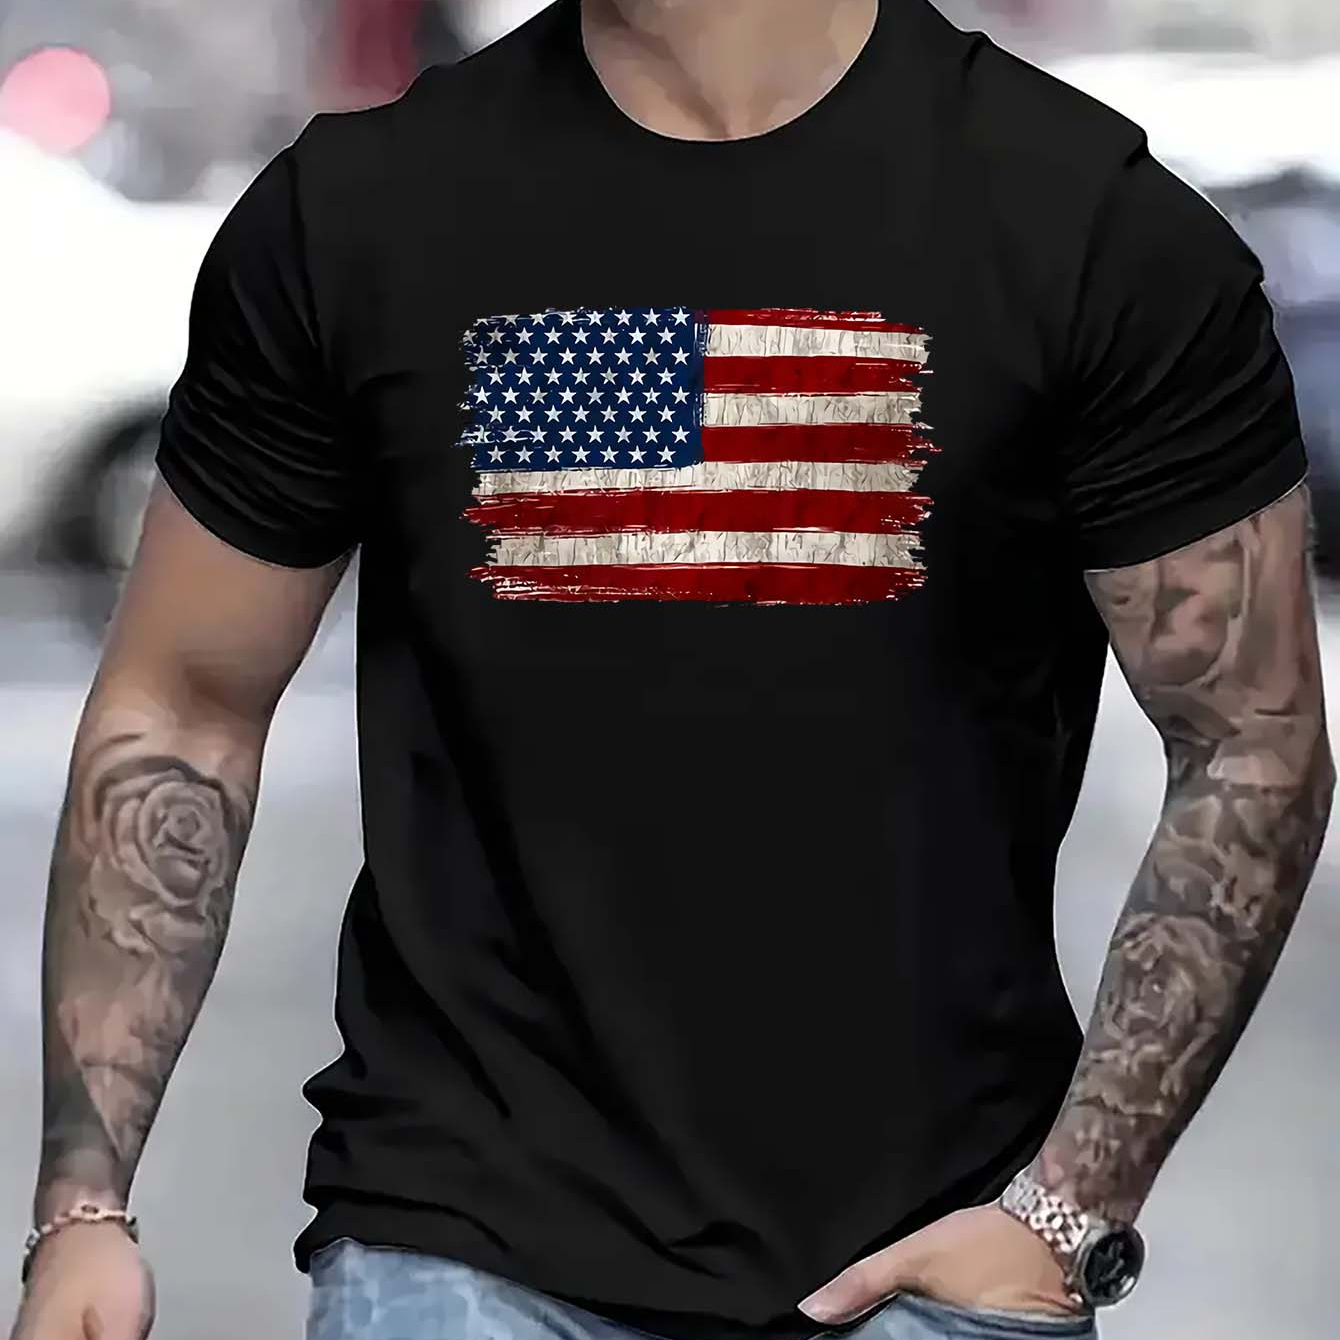 

Us National Flag Graphic Print Crew Neck Active T-shirt For Men, Casual Comfy T-shirts For Summer, Men's Clothing Tops For Daily Gym Workout Running